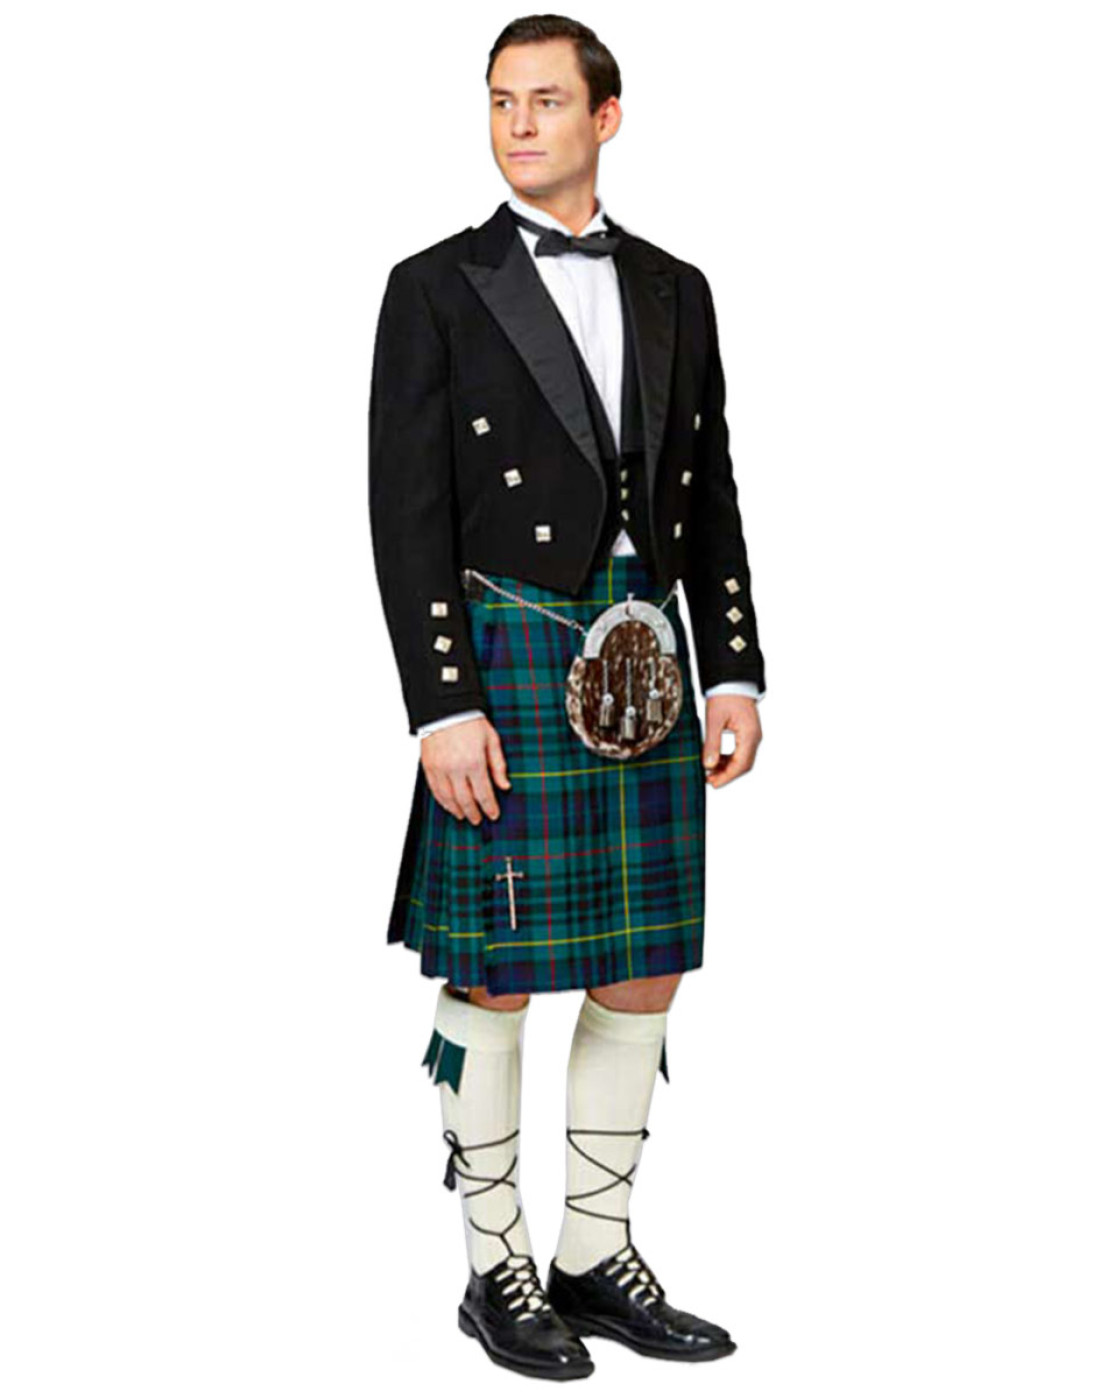 Champion Kilts™ - Find Your Perfect Kilts For Men and Women Here